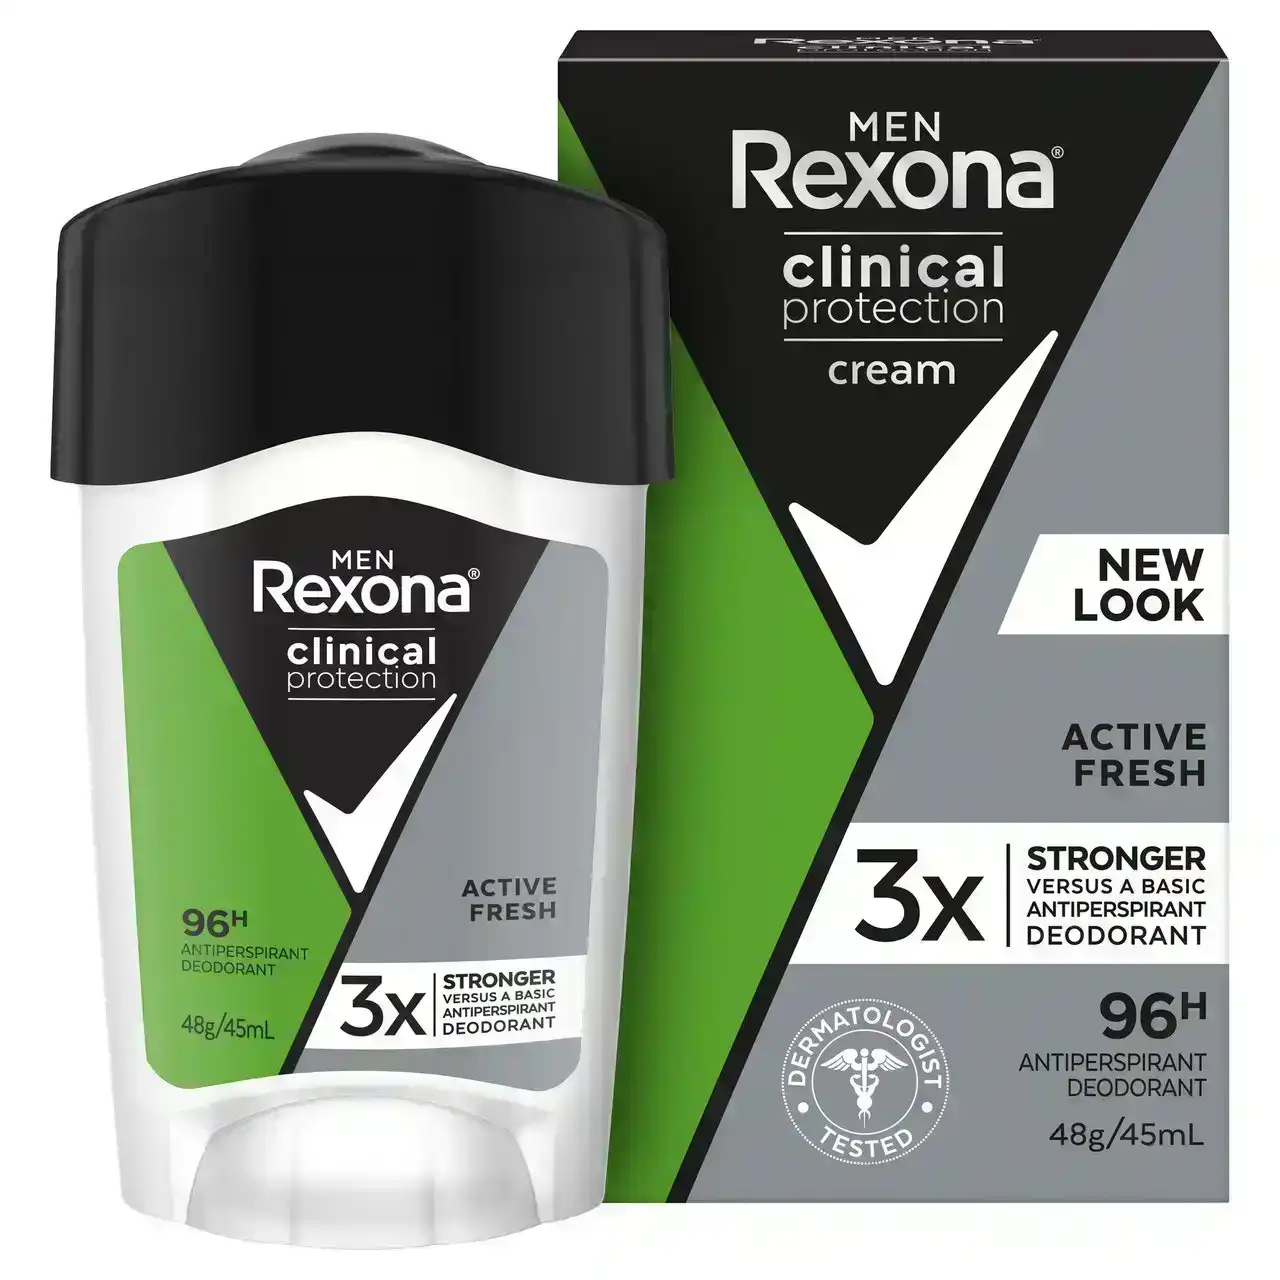 Rexona Men Clinical Protection Antiperspirant Deodorant Active Fresh for 3x stronger protection(versus regular antiperspirant deodorant)45mL 1